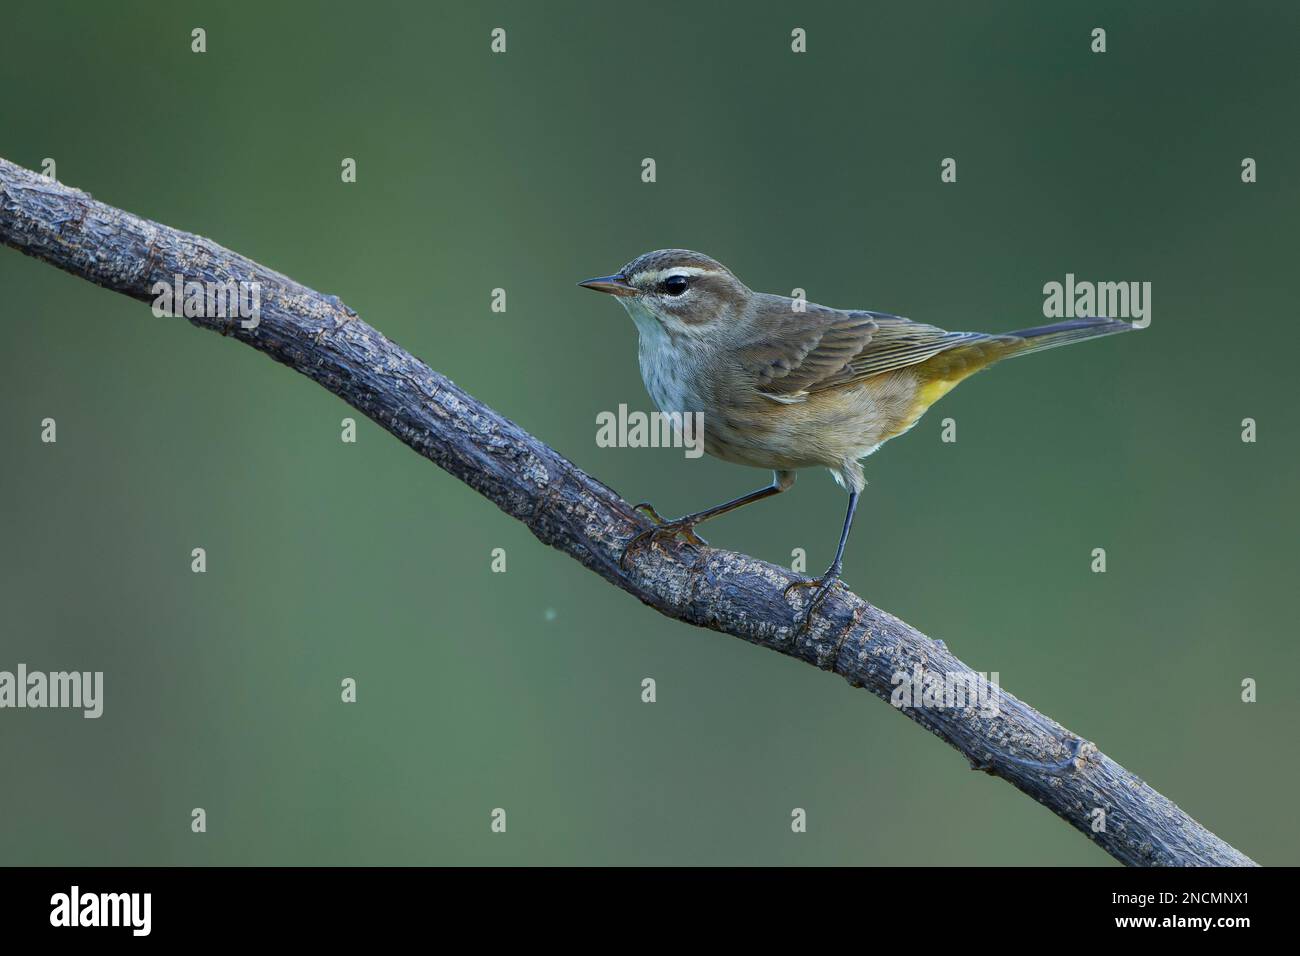 A Palm Warbler perching on tree branch Stock Photo